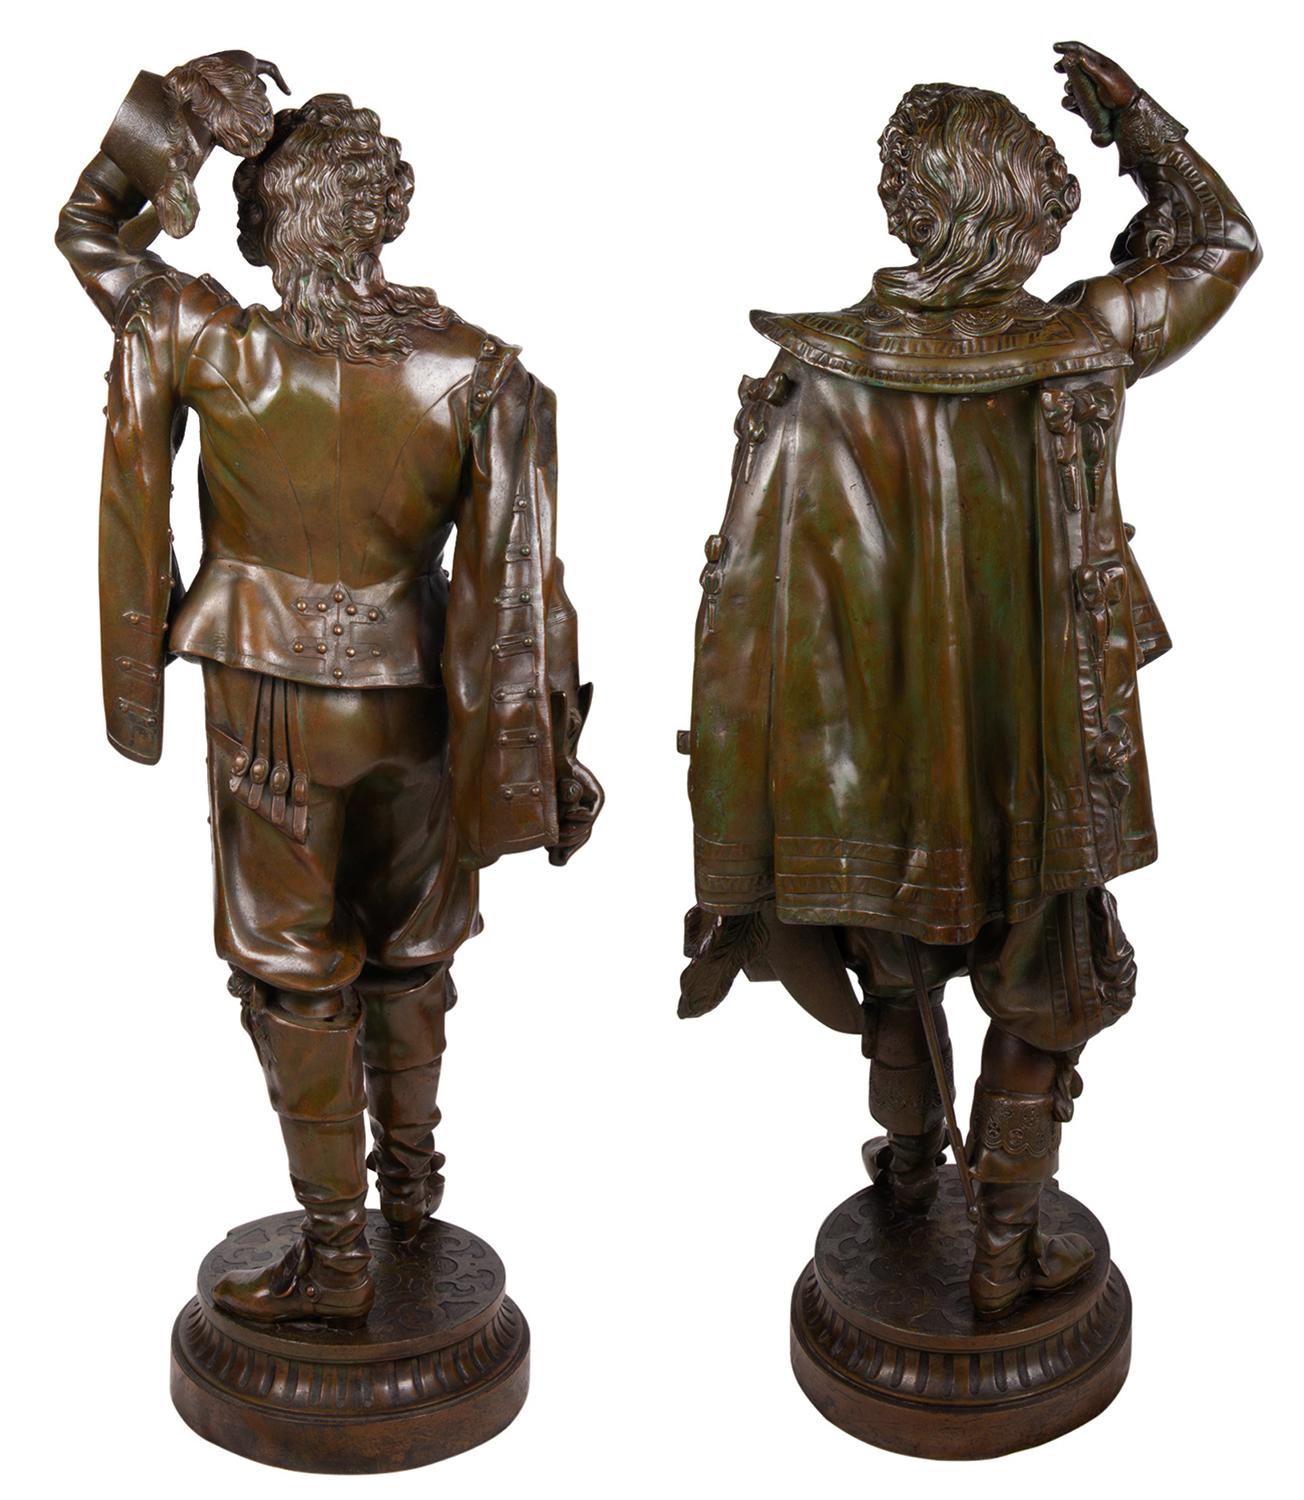 A very impressive pair of 19th century French patinated bronzed Spelter Caveliers, each standing a gallant pose.